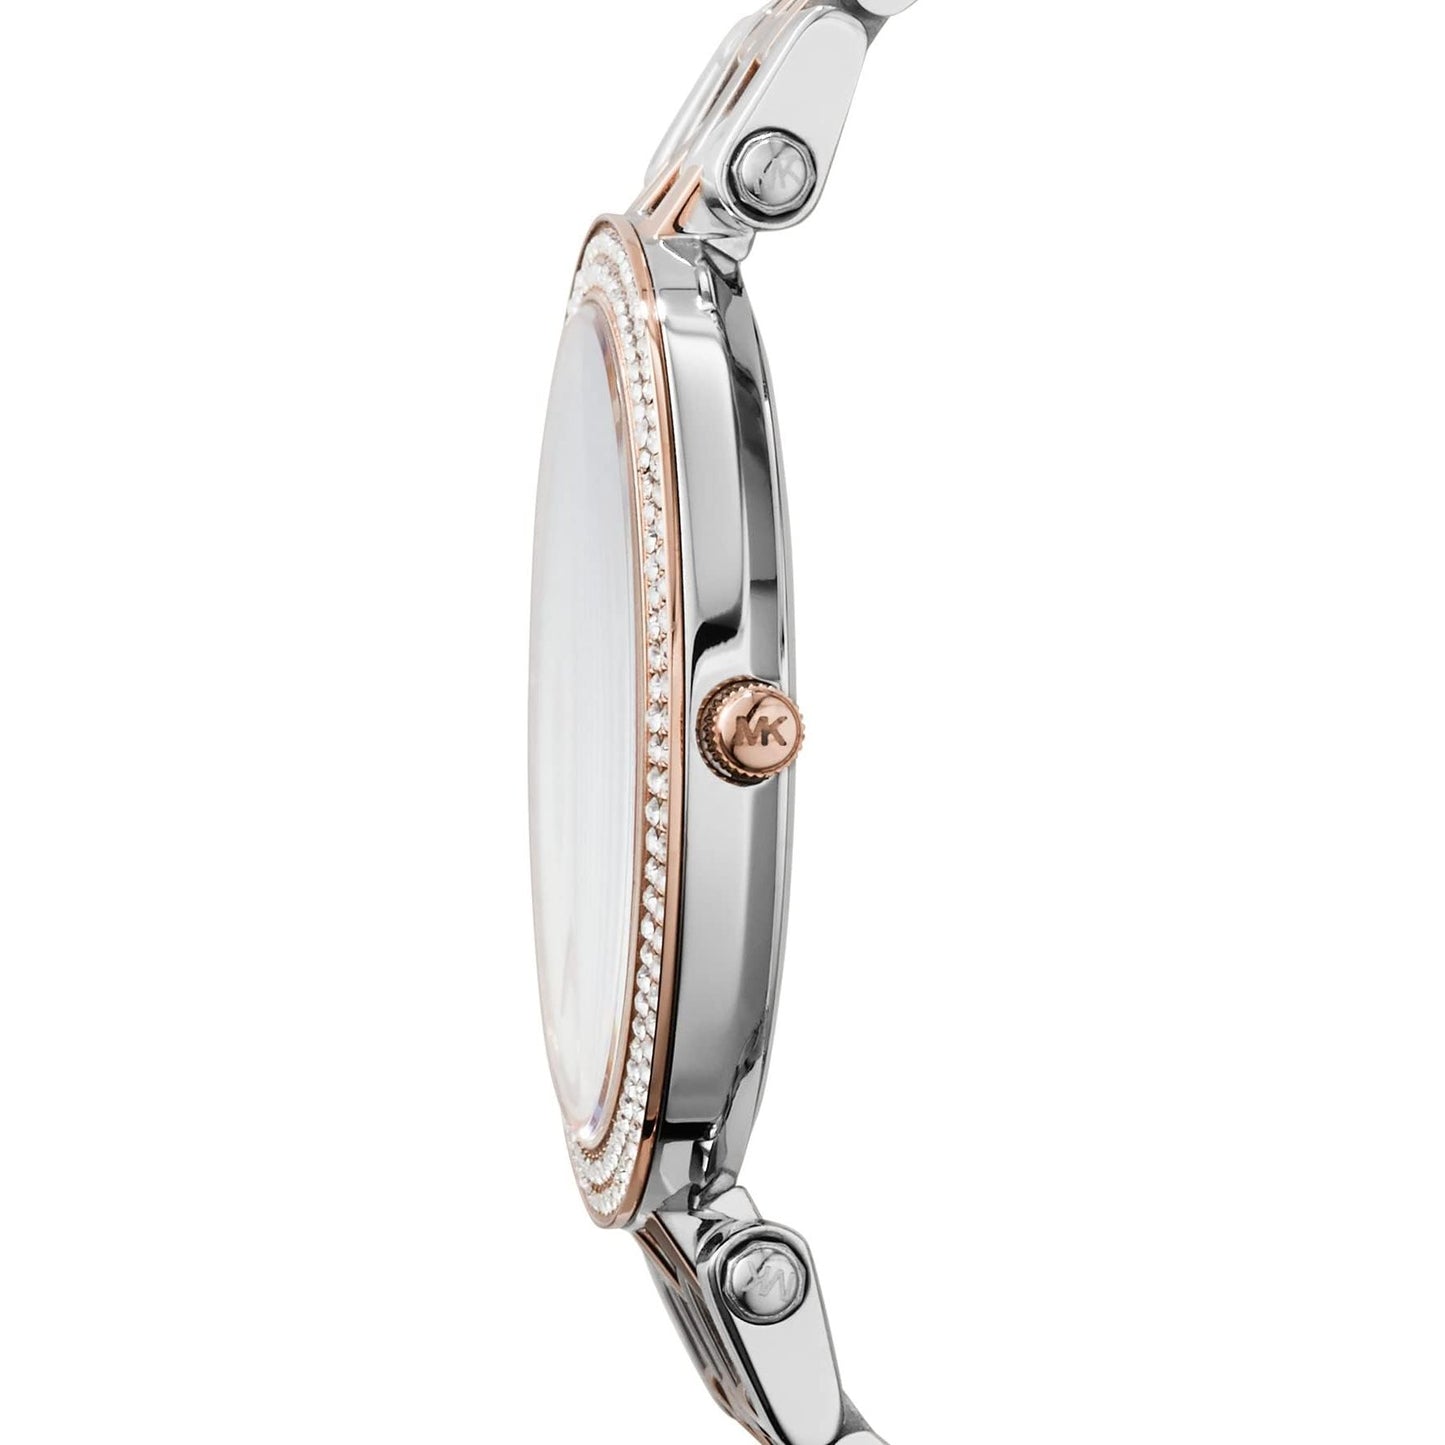 Michael Kors Women's Darci Watch Two-Tone Silver and Rose Gold 39mm (MK3321)